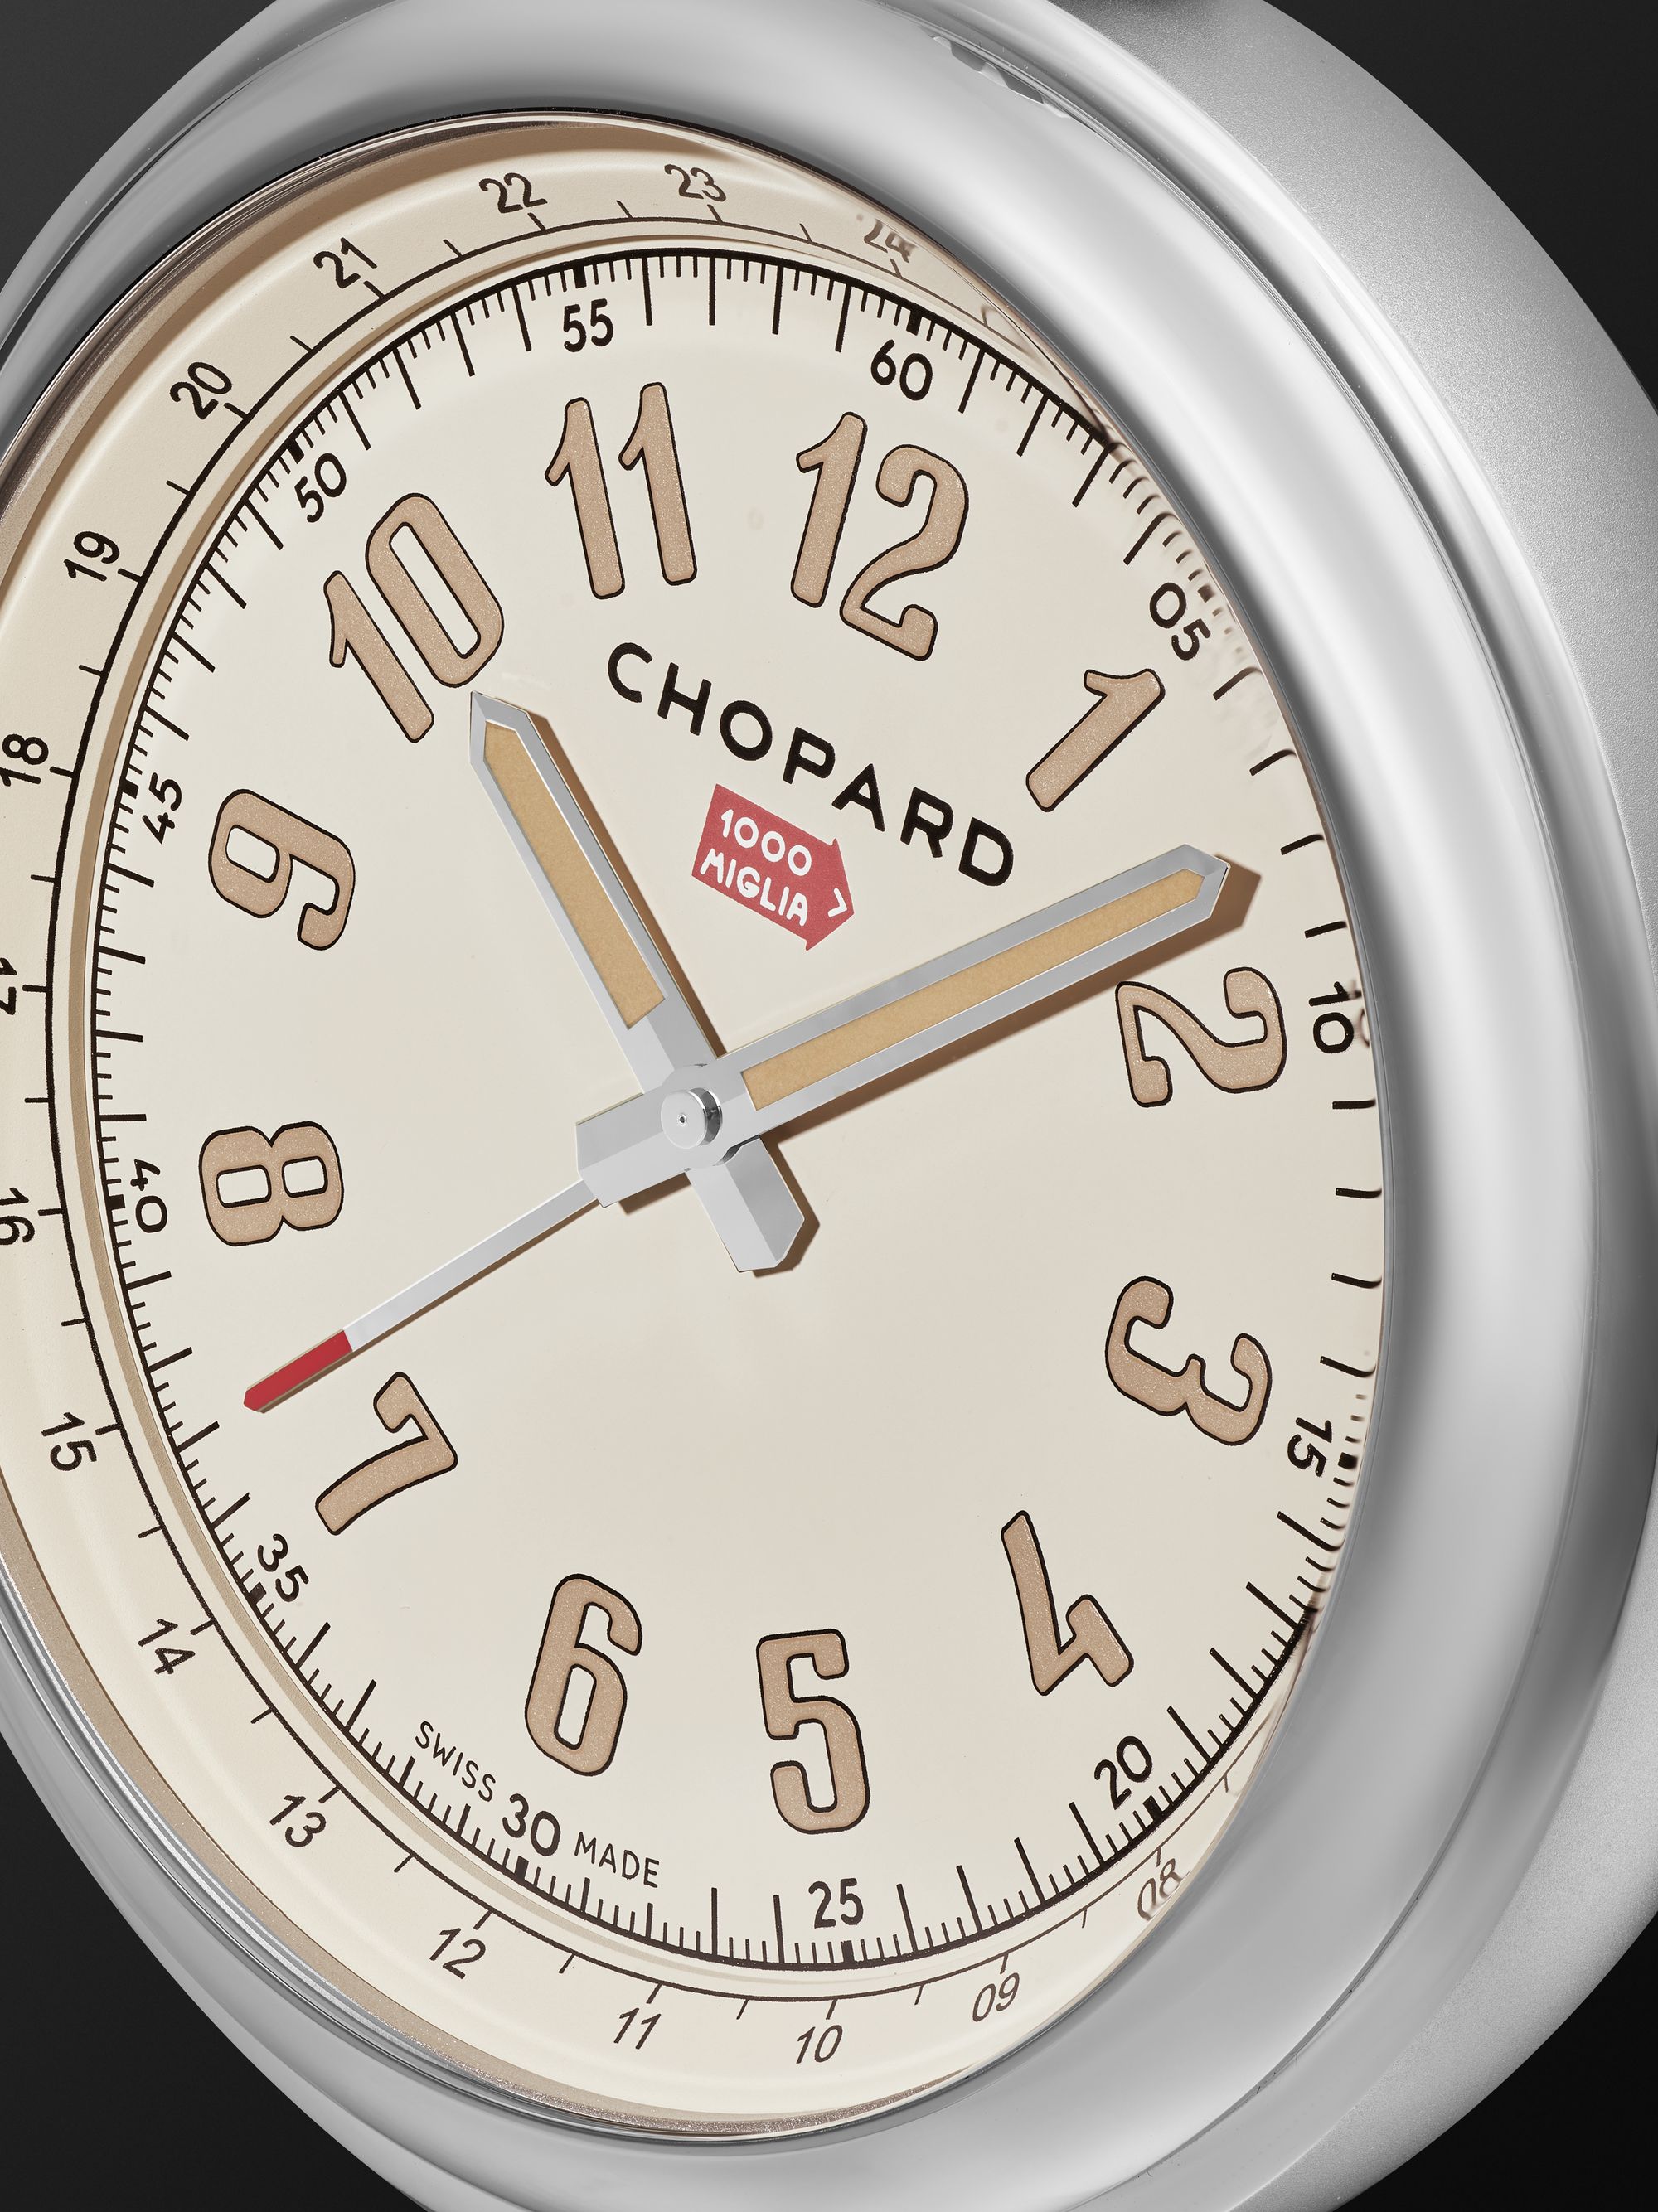 CHOPARD Classic Racing Silver Table Clock, Ref. No. 95020-0124